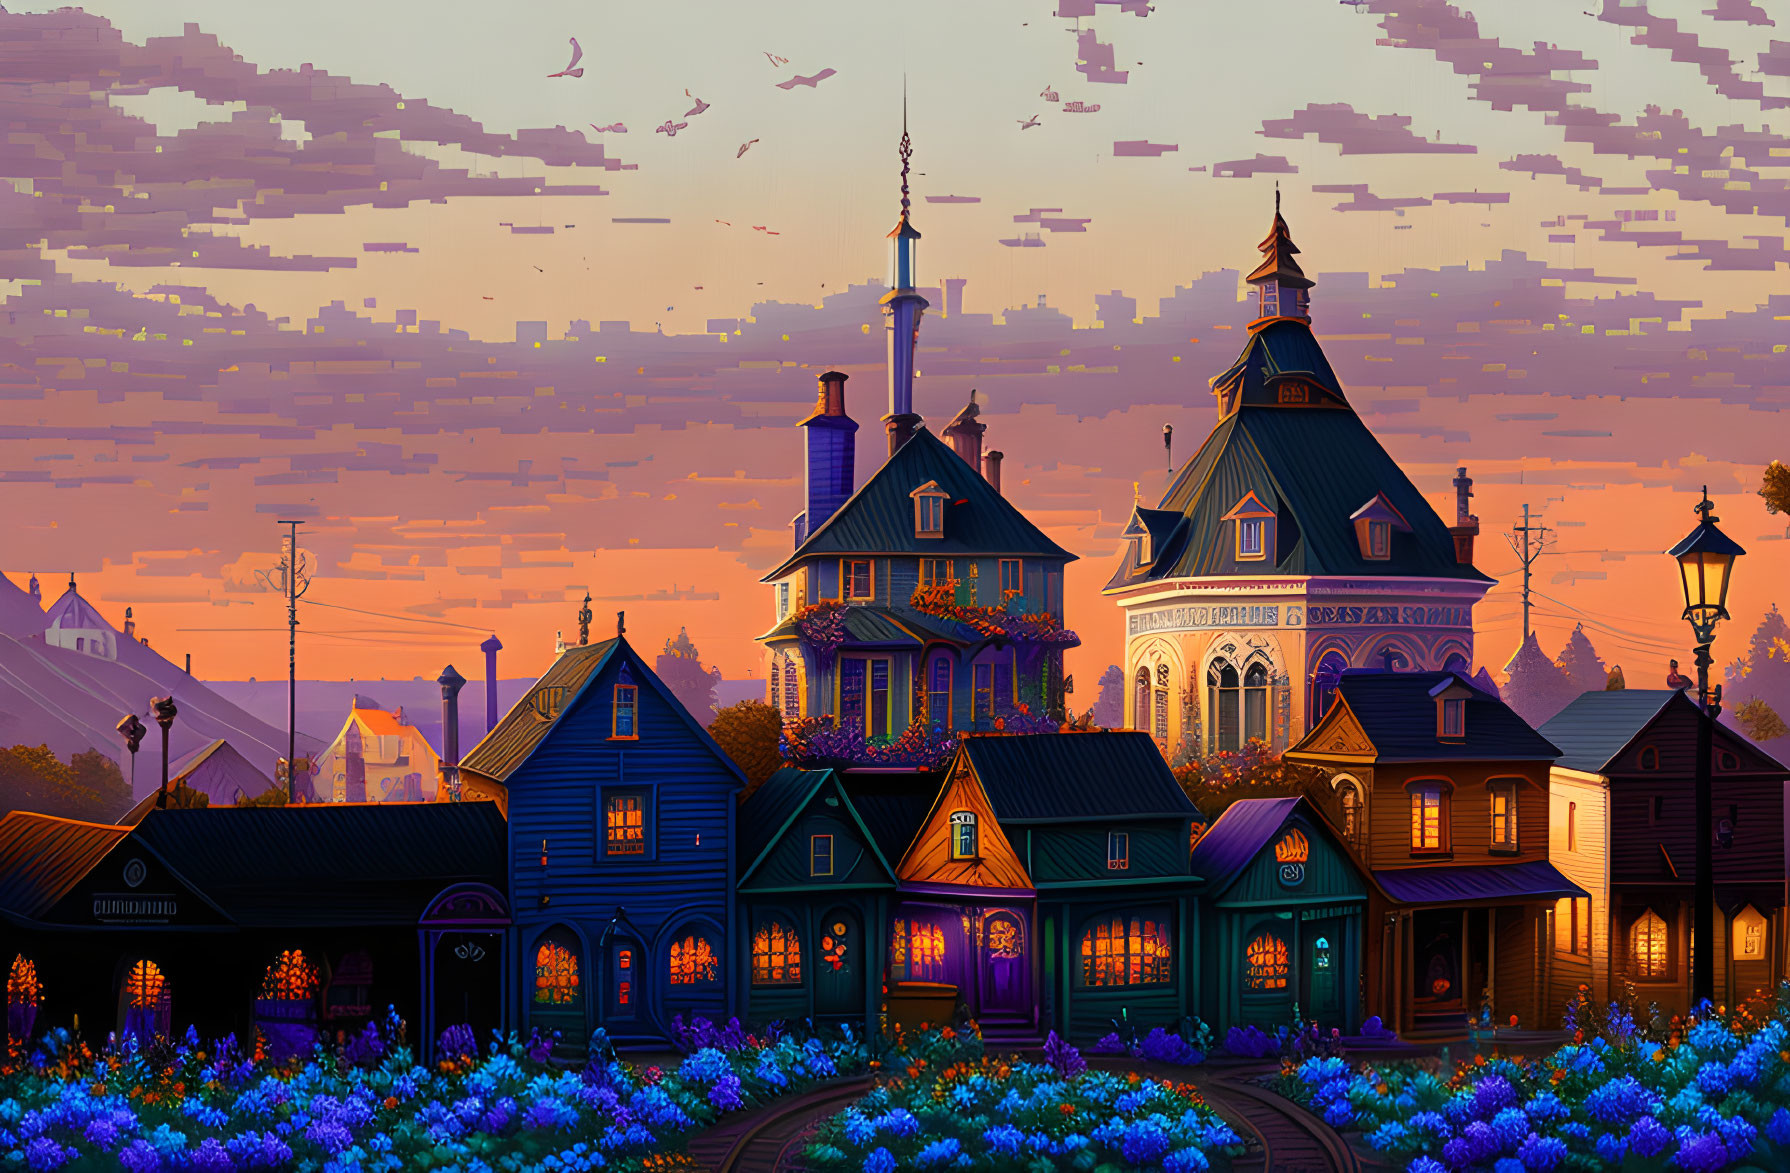 Victorian-style houses at sunset with purple flowers and distant tower